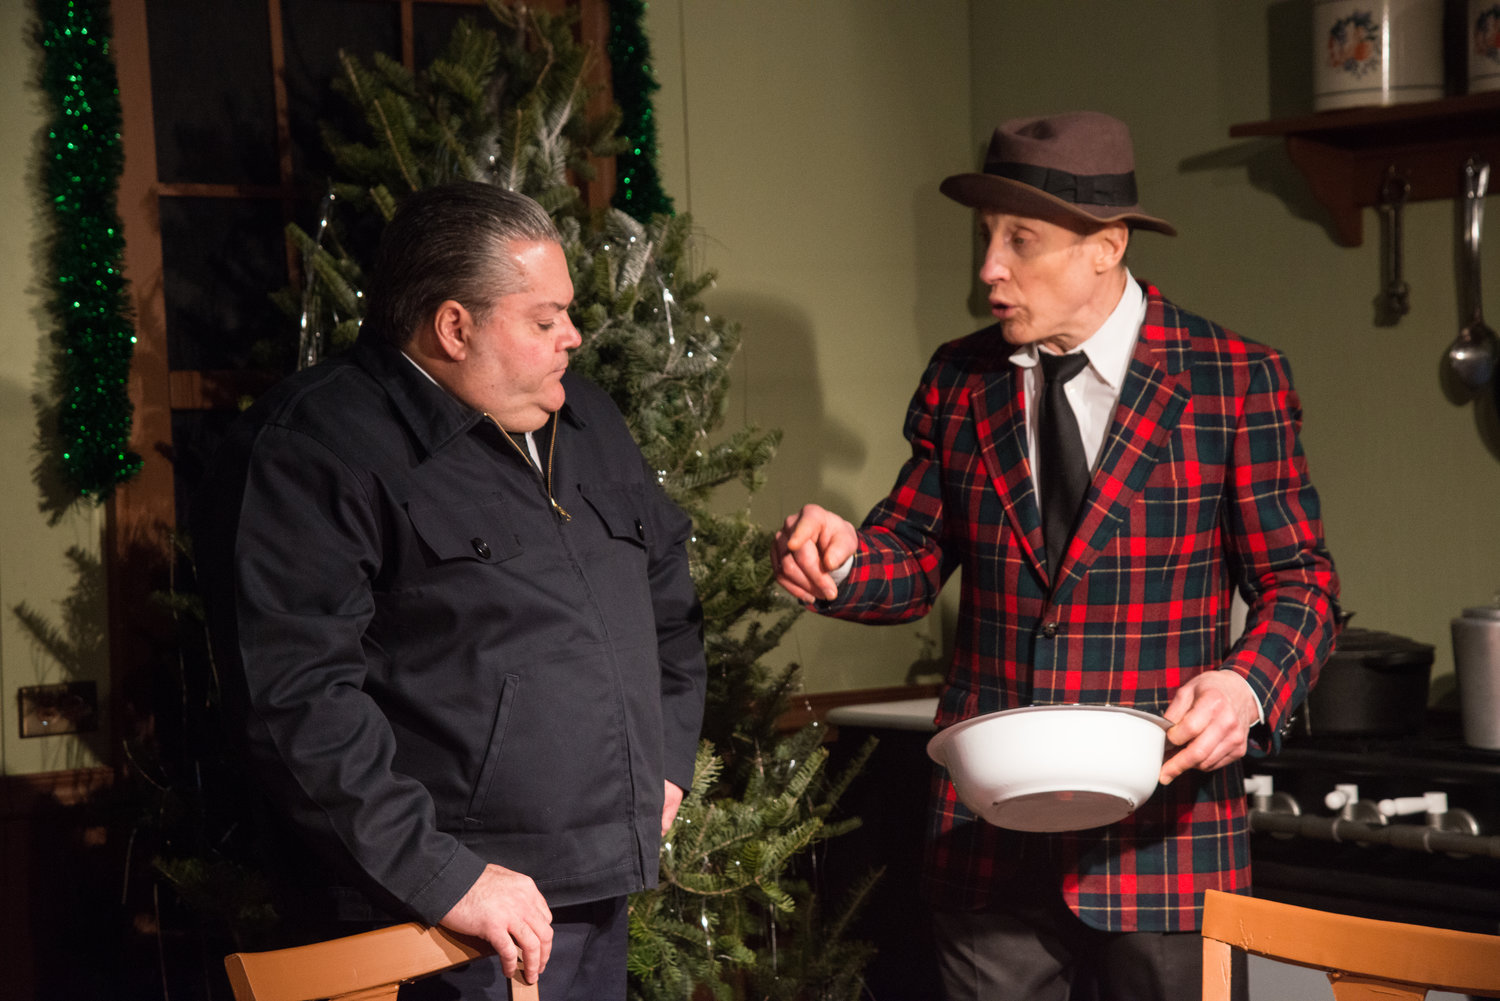 Patrick Marone, left, as Ralph Kramden, and Fred DiMenna, portraying Ed Norton, will entertain seniors performing an episode from ‘The Honeymooners’ at the Glen Cove Senior Center on Dec. 16 free of charge.